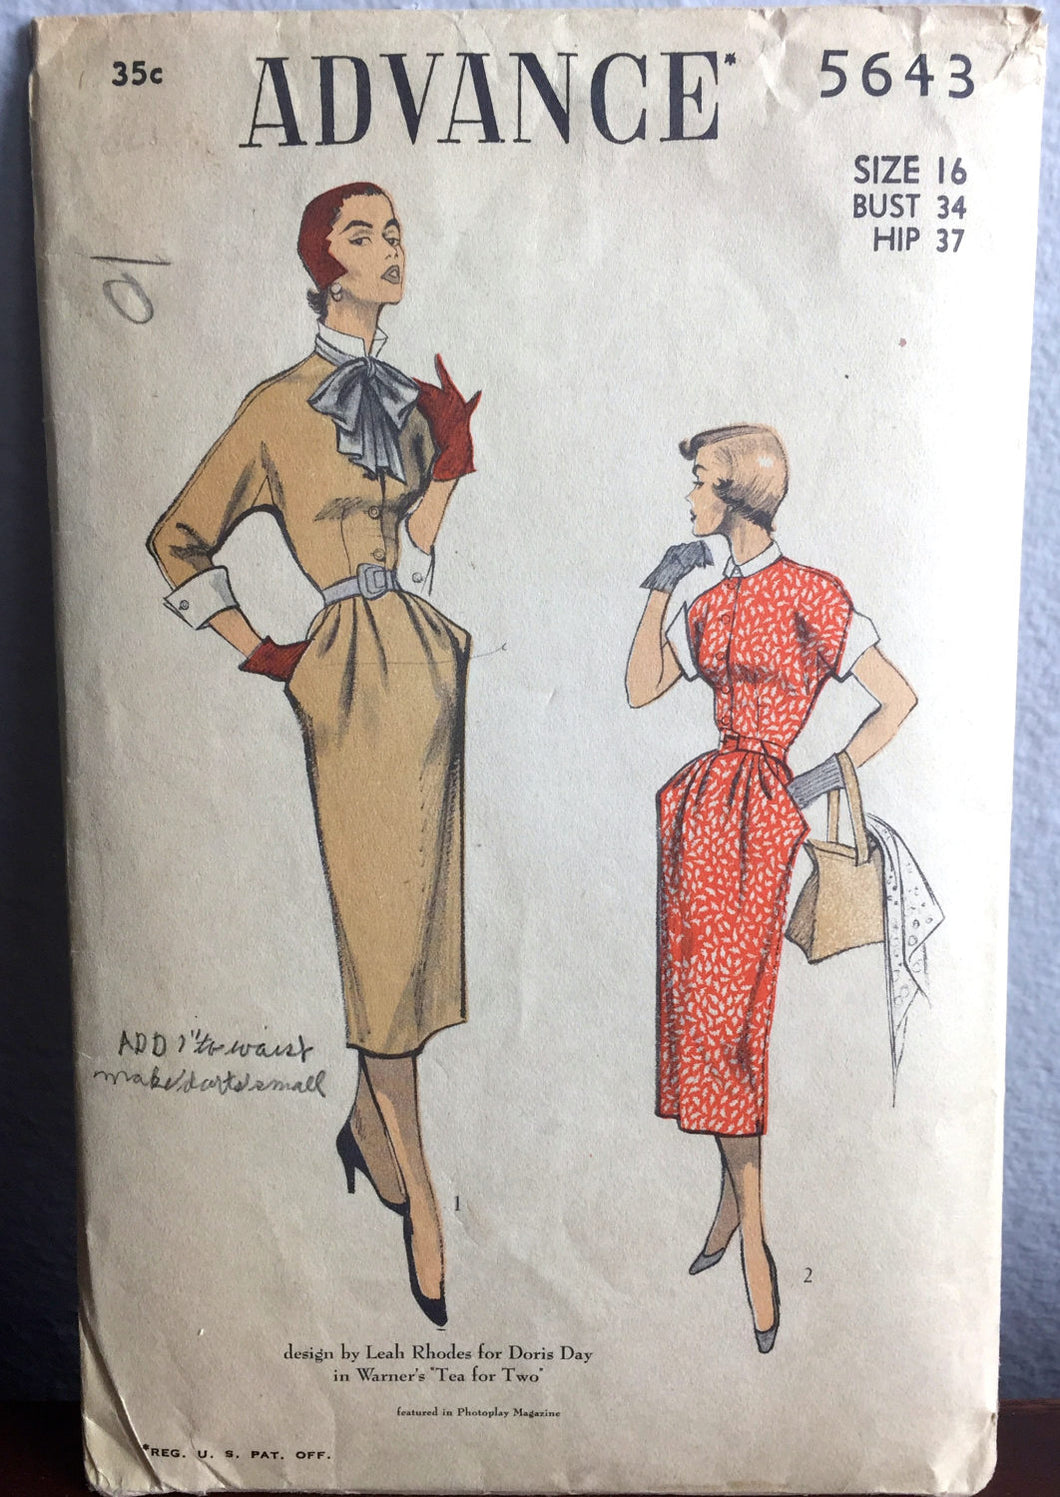 1950's Advance One-Piece Dress with Kimono sleeves, Cuffs, and Large Bow Pattern - Bust 34